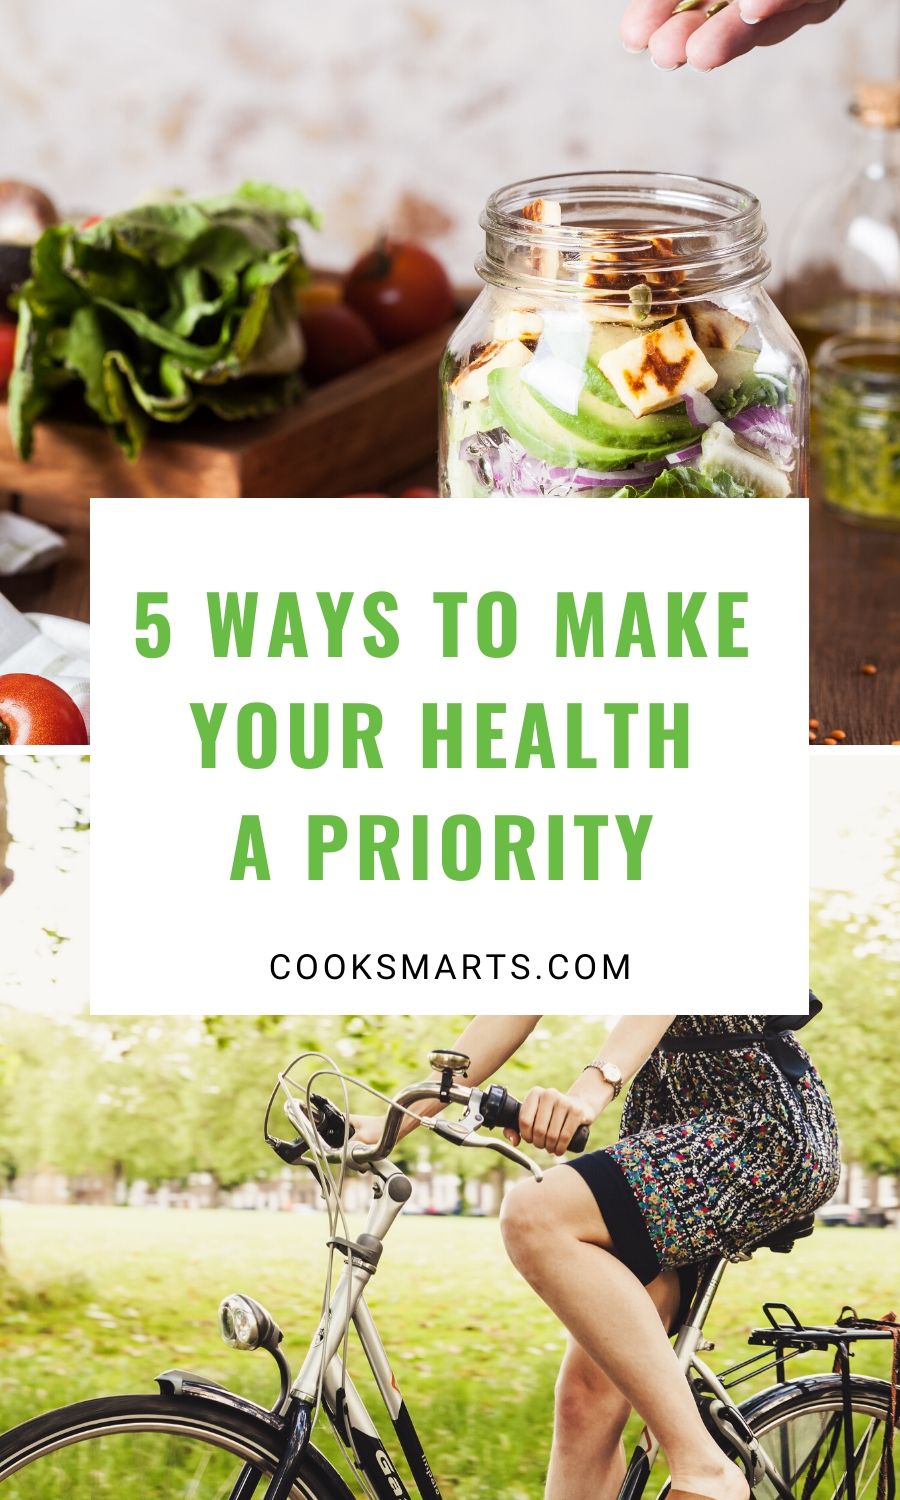 5 Ways to Make Your Health a Priority | Cook Smarts